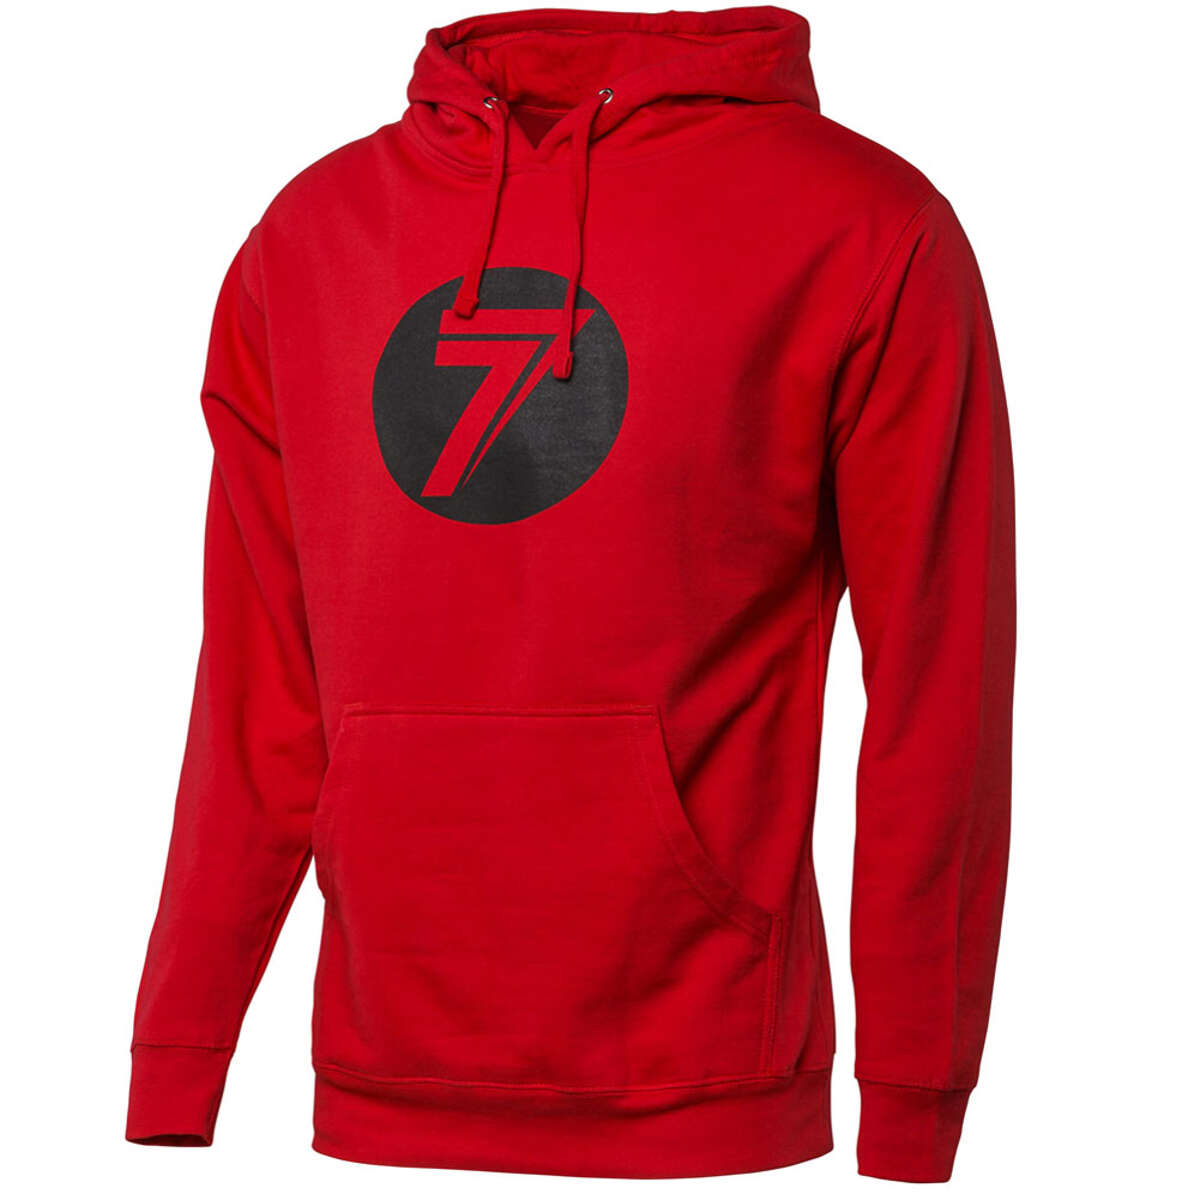 Seven MX Kids Hoody Youth Dot Red